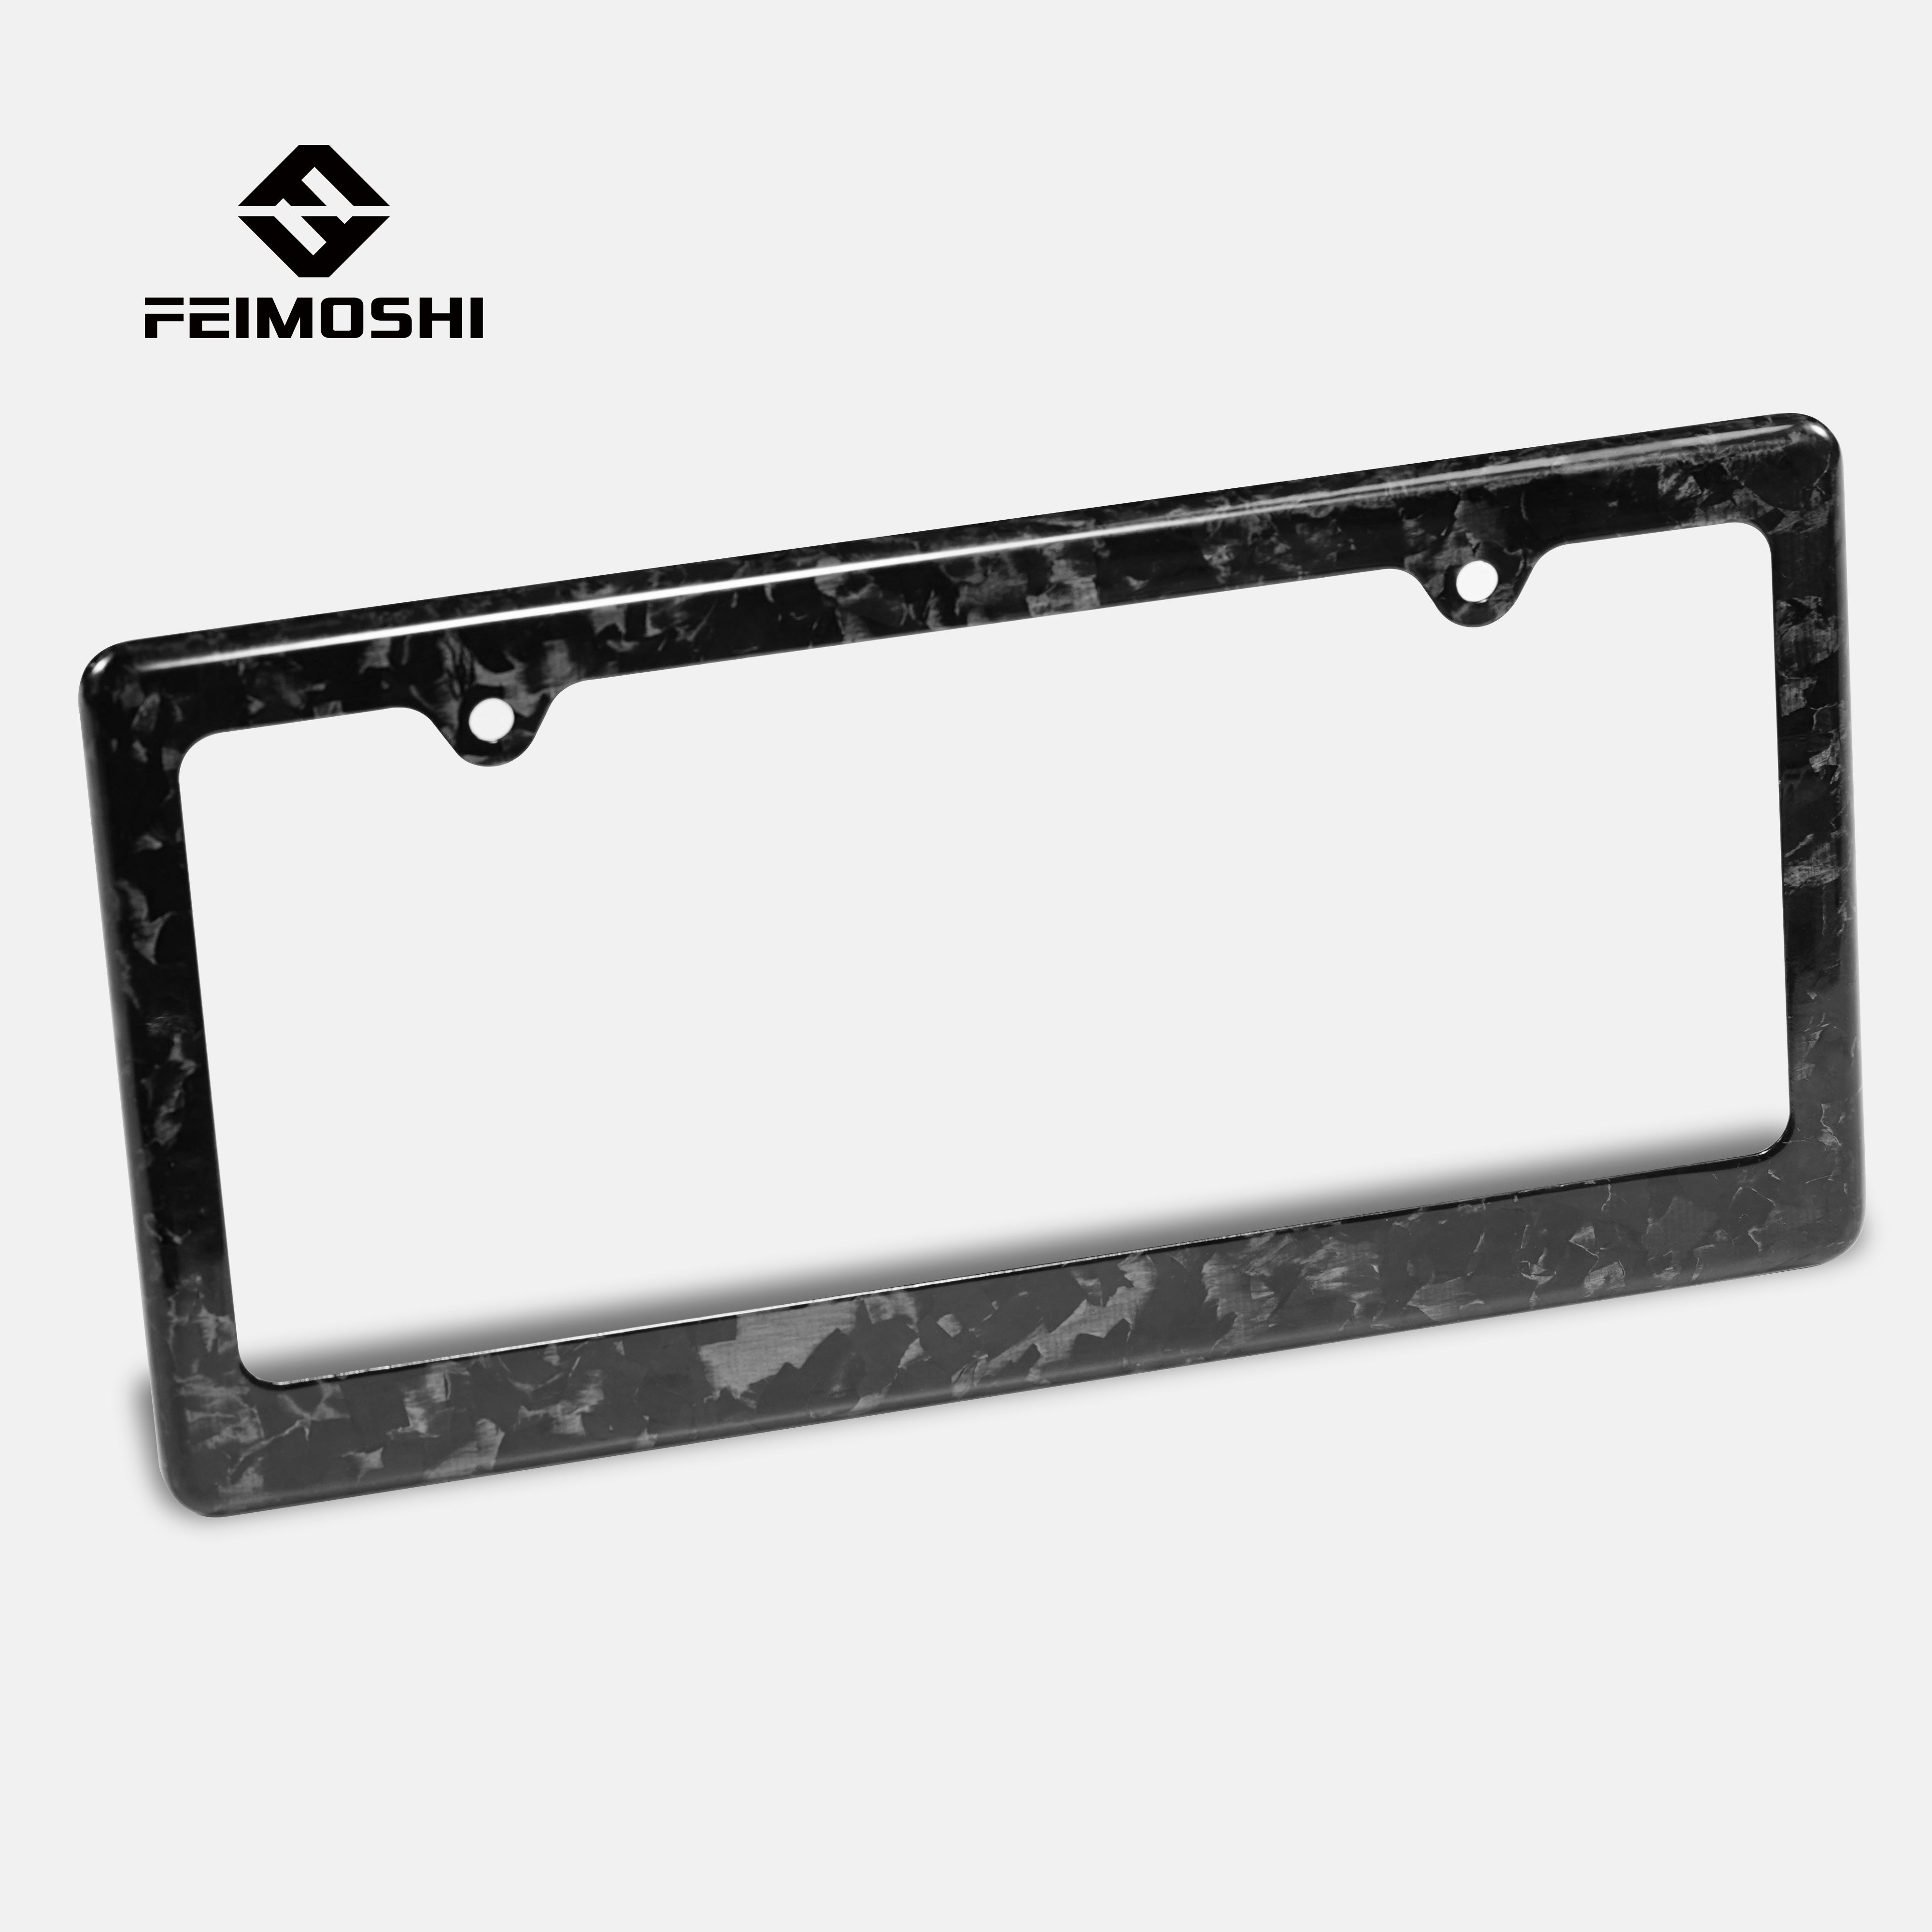 Beautiful Surface Forged Carbon Fiber License Plate Frame For Canda And Mexico Vehicles Featured Image